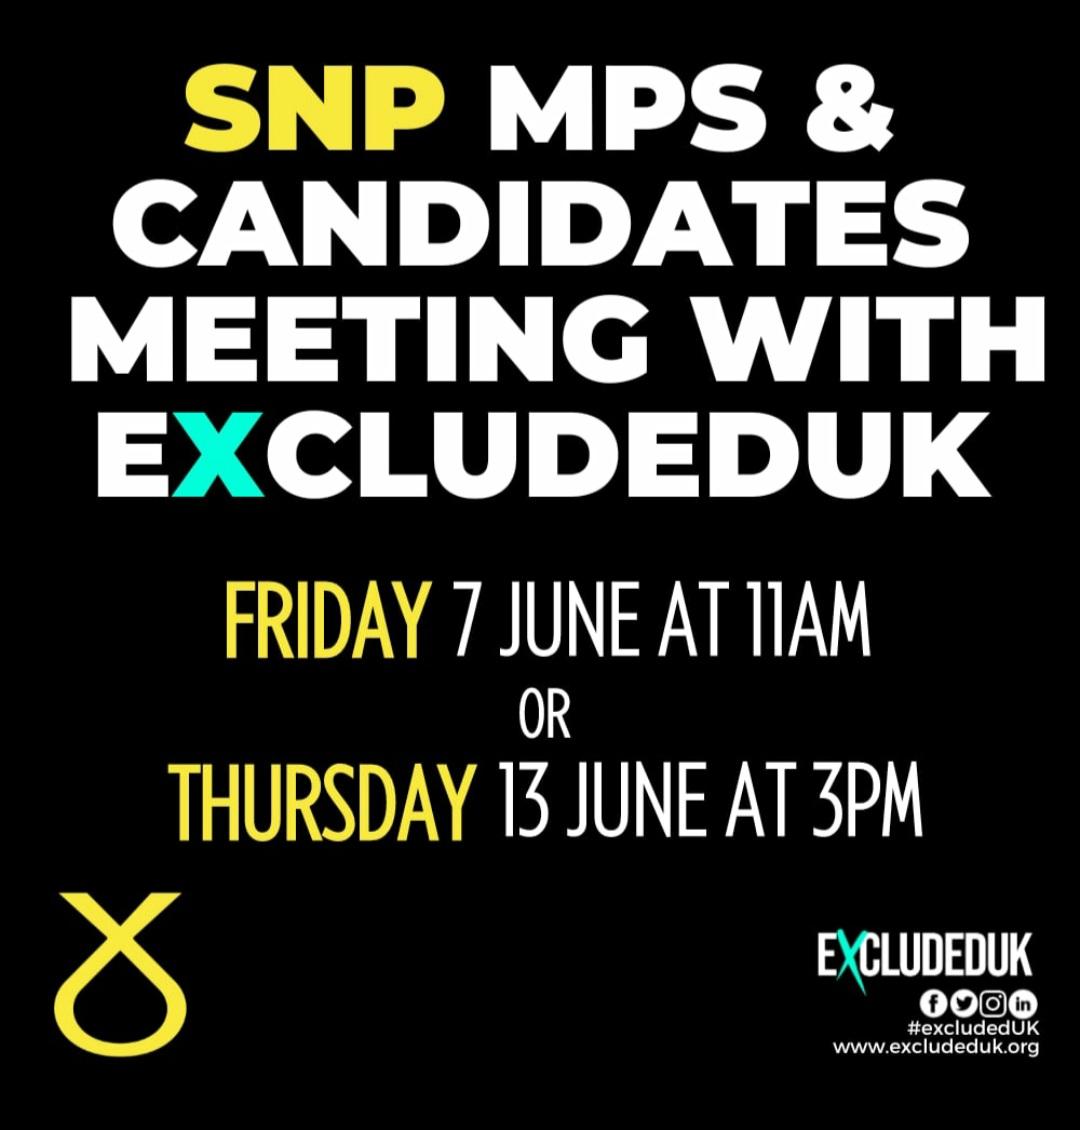 Hi @StephenFlynnSNP I appreciate our quick chat outside Parliament to talk about the crisis and the @ExcludedUK-@theSNP Zoom calls Here is the Carol Vorderman interview that you asked for, and look forward to speaking with you again soon Tim @ExcludedUK x.com/excludedfighte…